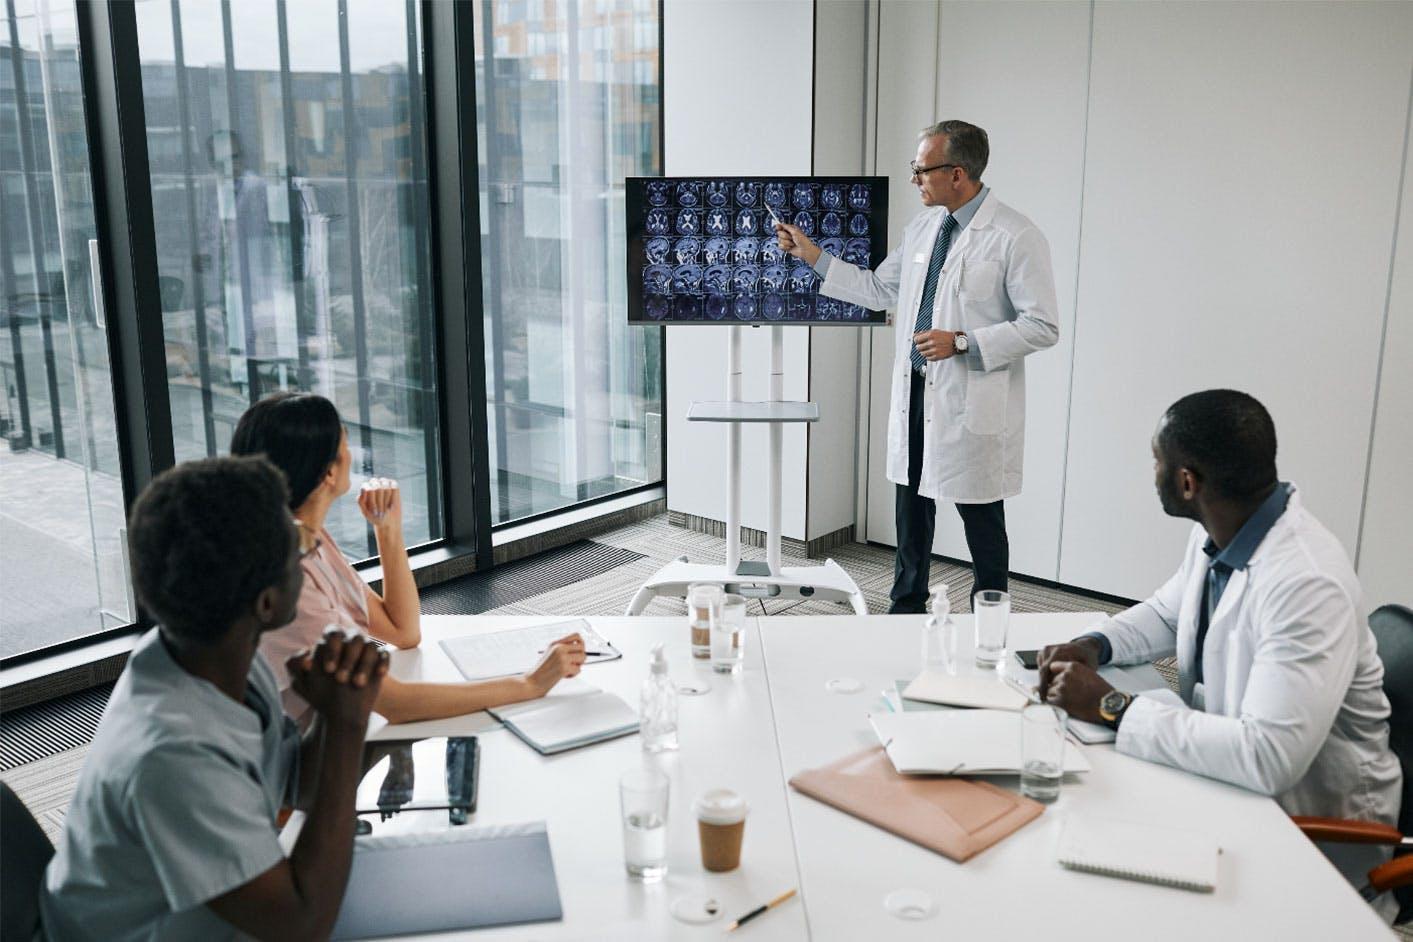 A medical professional uses hospital digital signage to present meeting